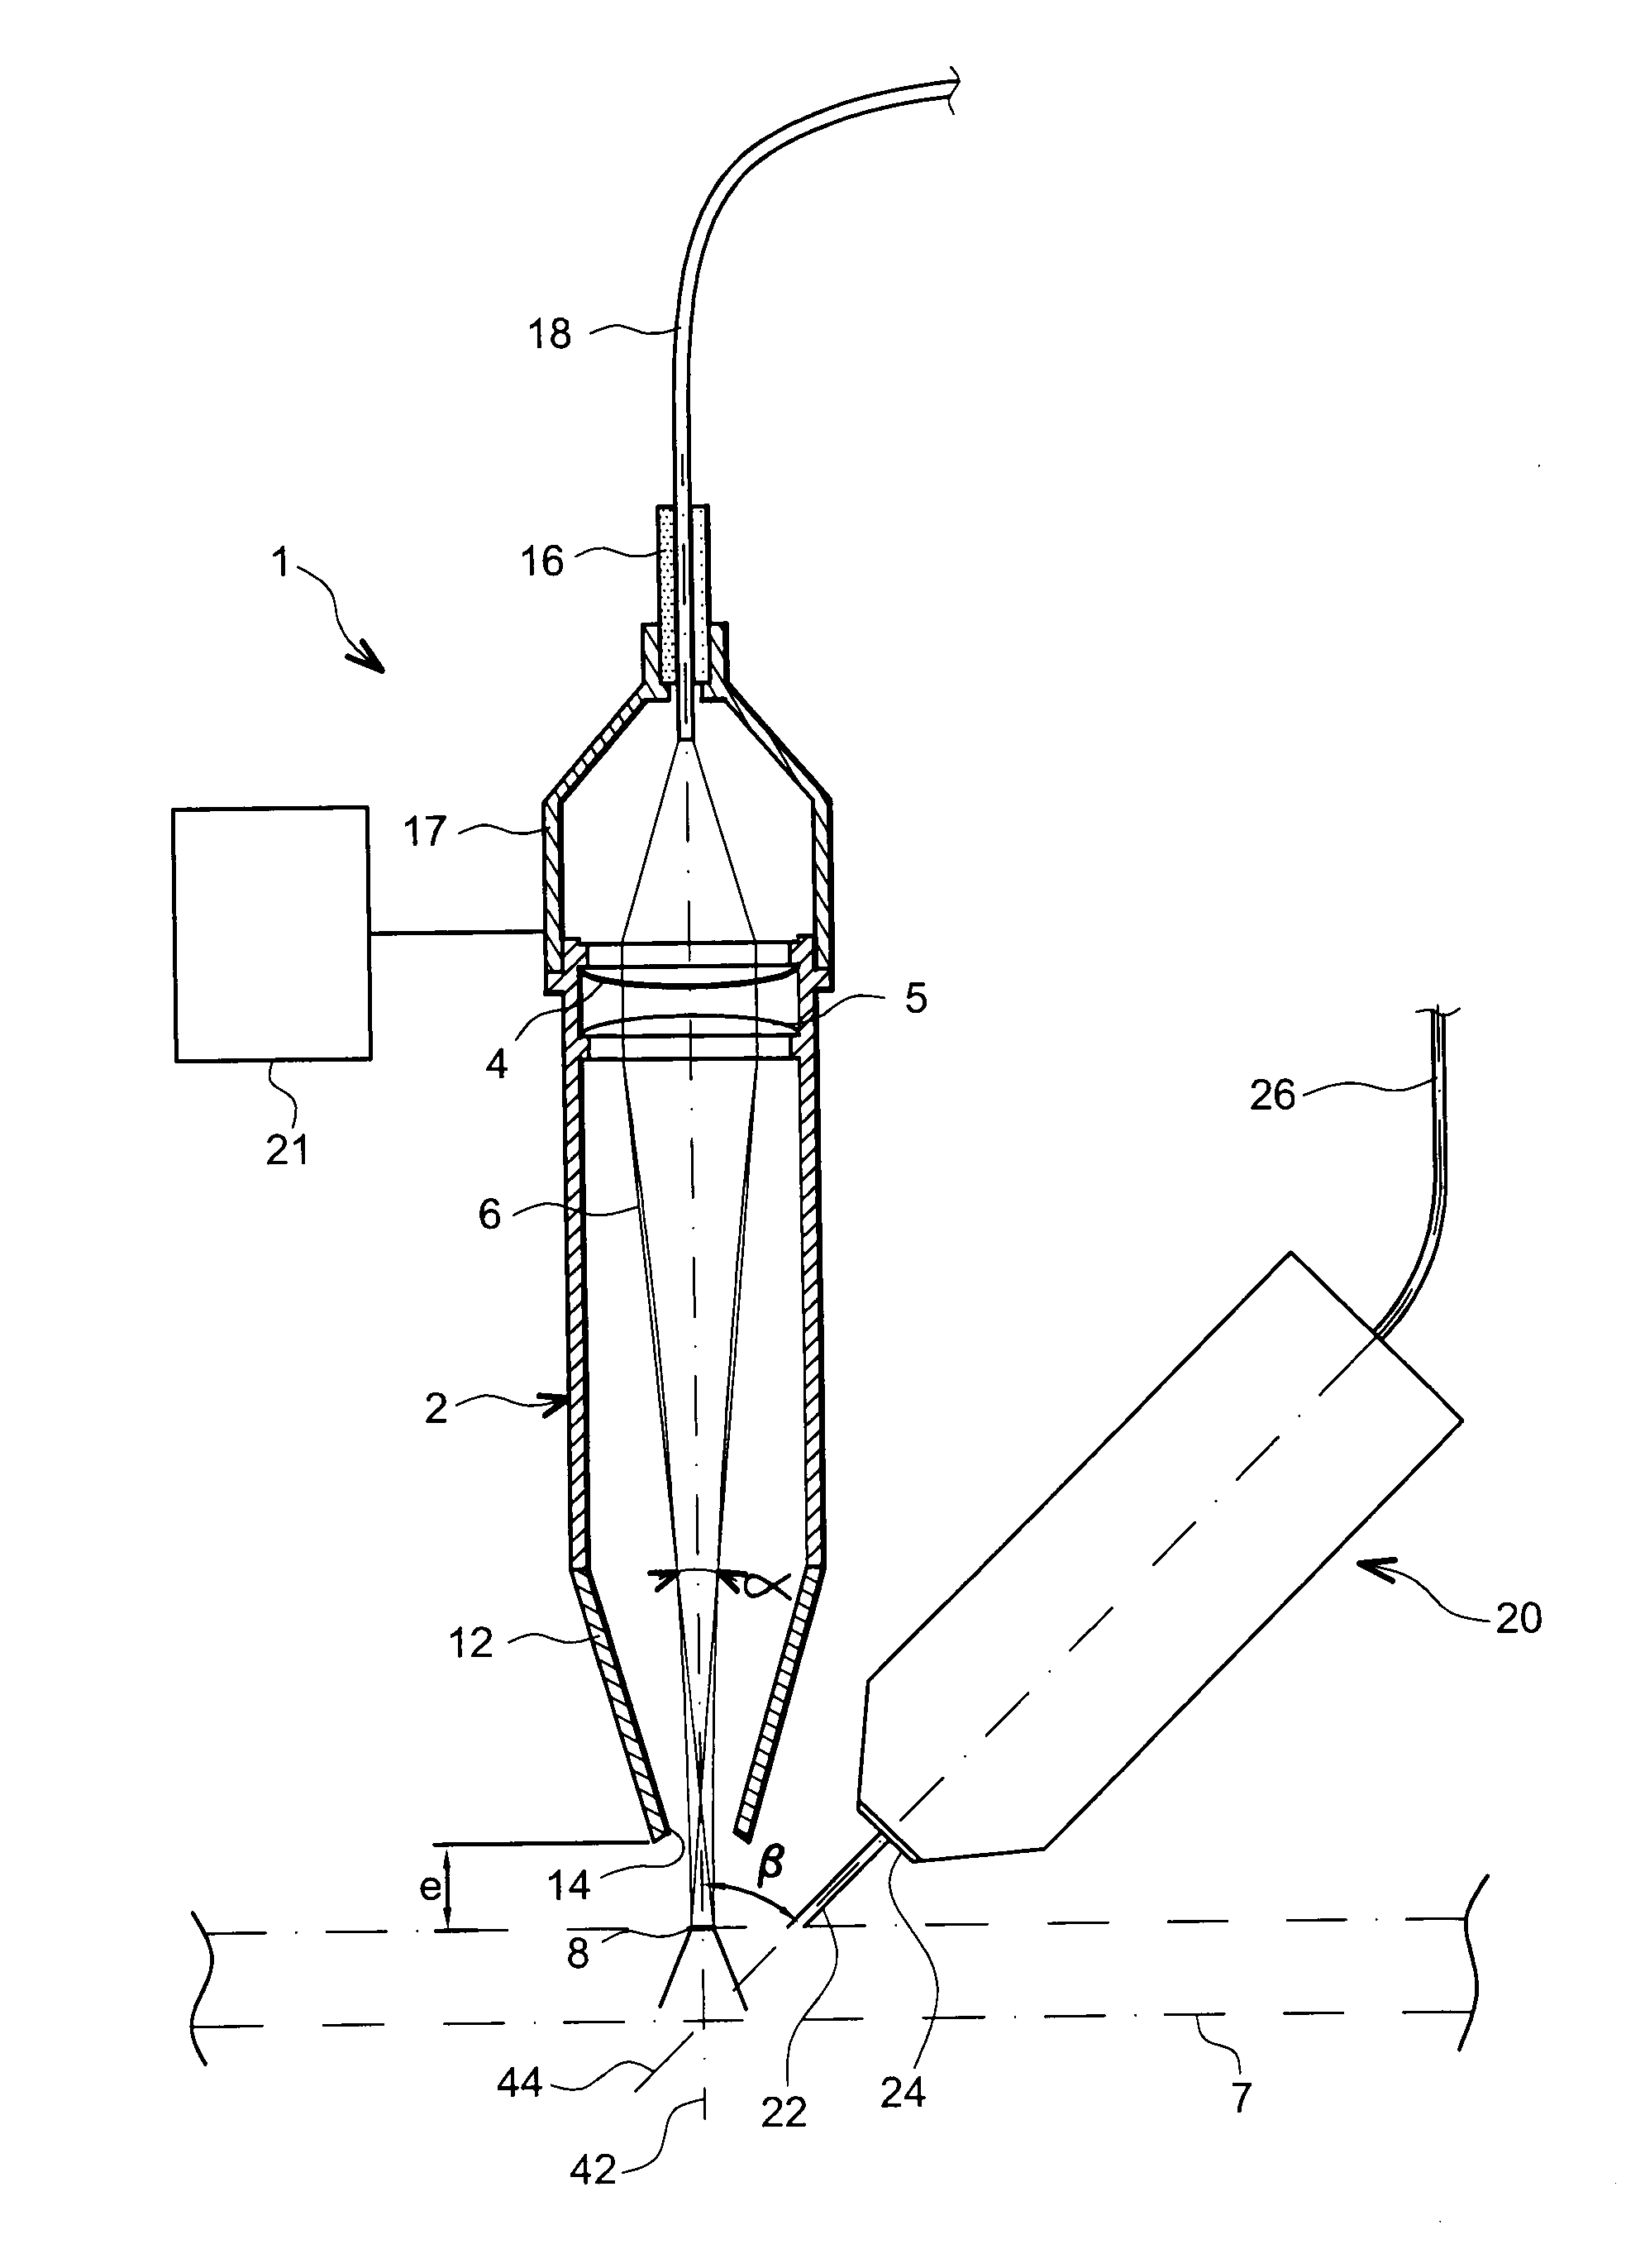 Method and Installation for Laser Cutting/Welding